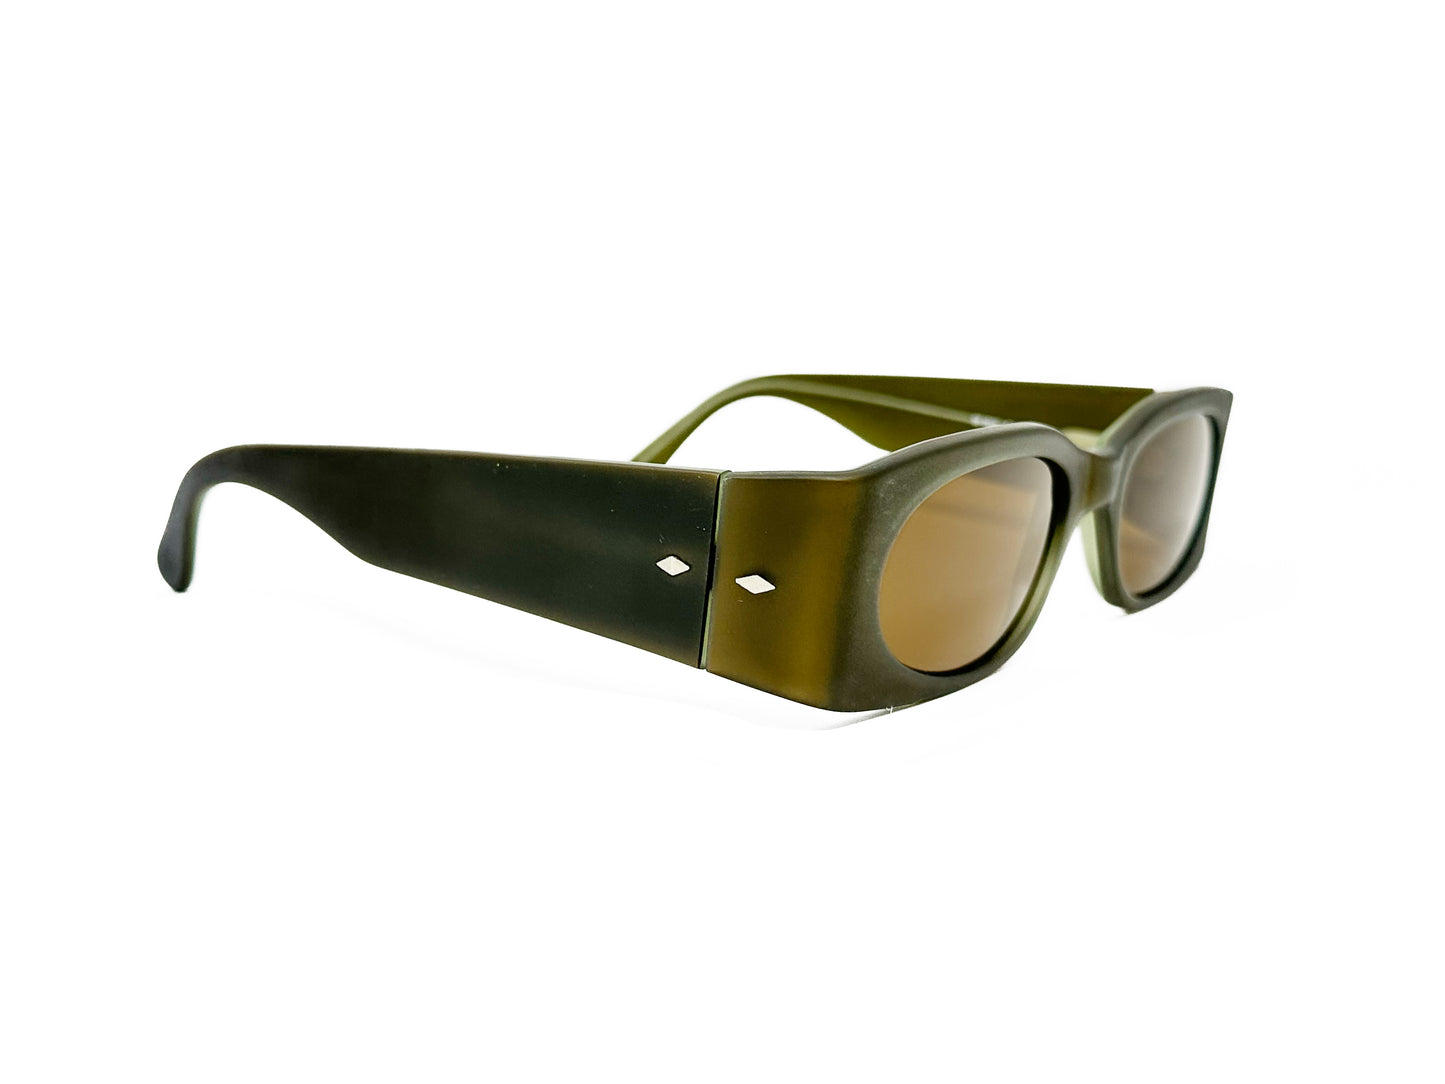 Kador rectangular acetate sunglasses with oval lenses. Model: DF2012. Color: M/1974 - Olive. Side view.